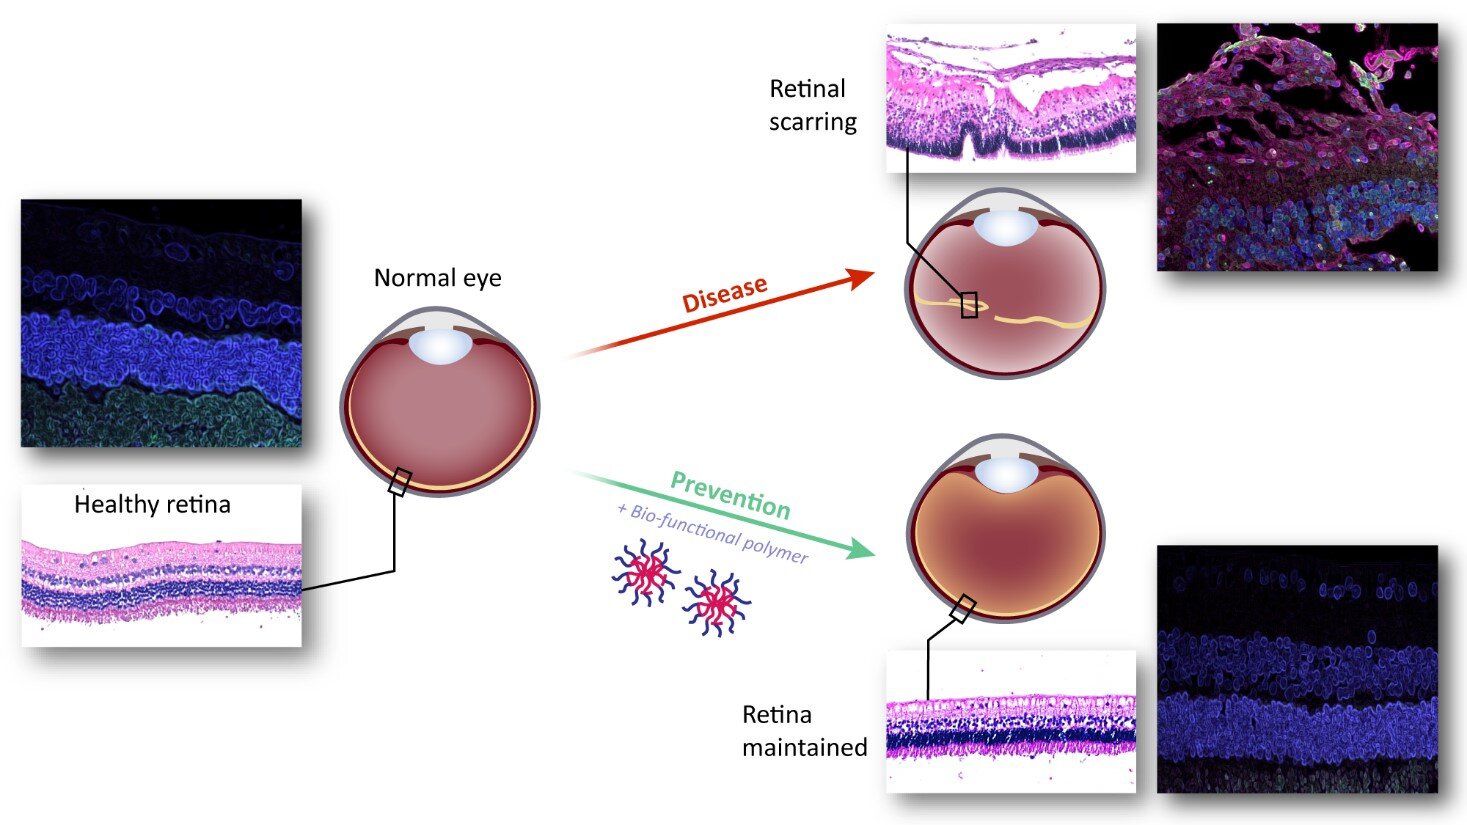 #A novel therapy using unique thermogel prevents retinal scarring